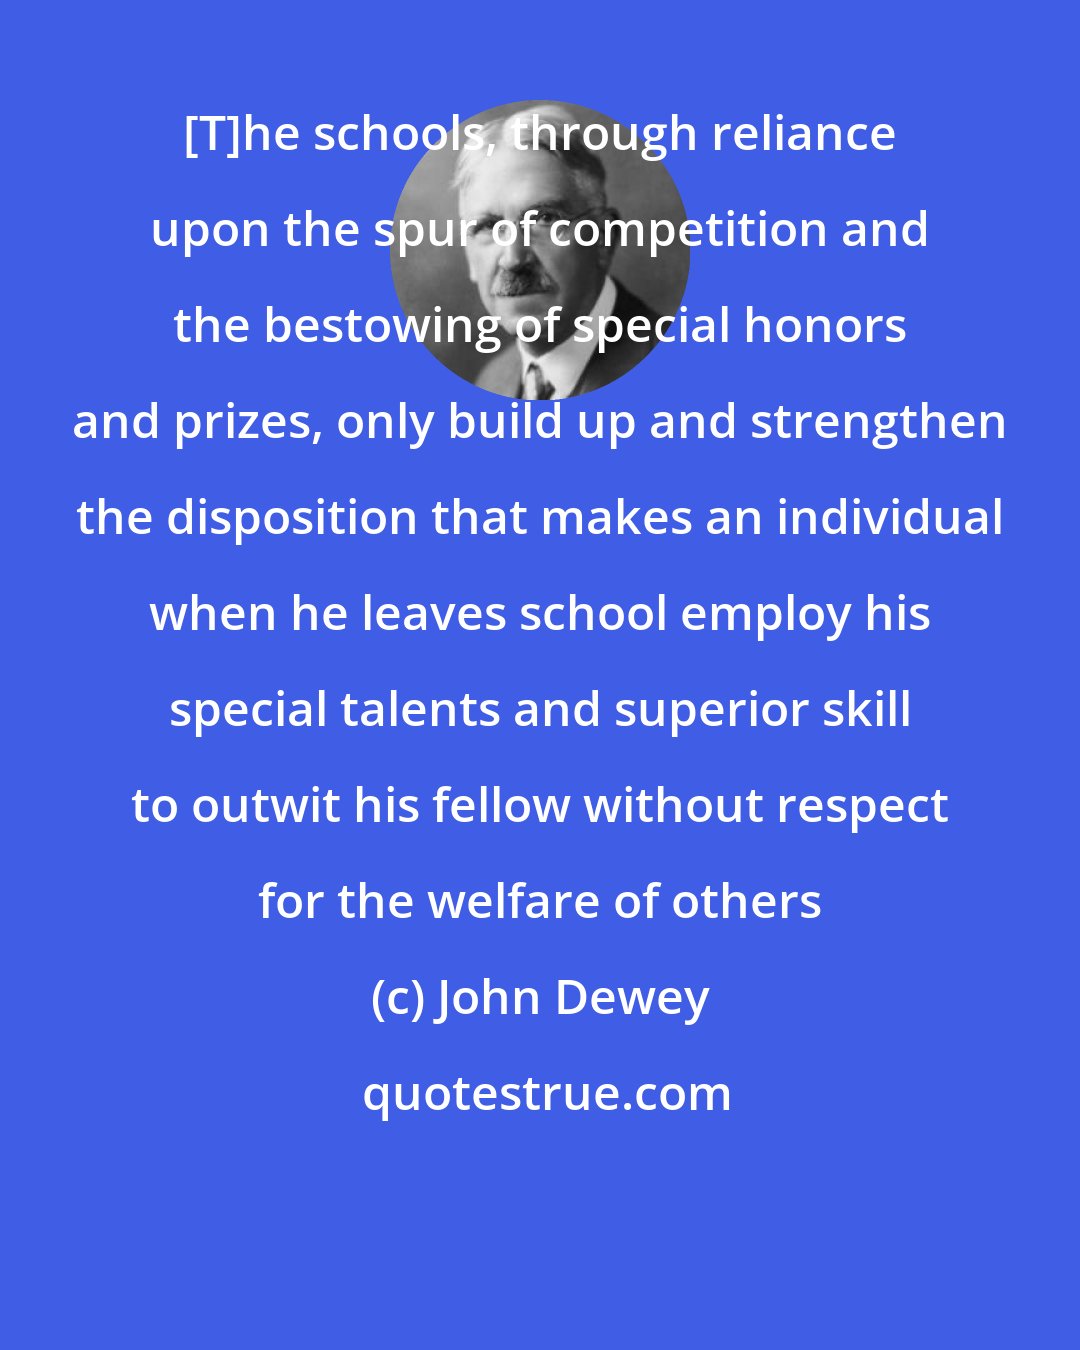 John Dewey: [T]he schools, through reliance upon the spur of competition and the bestowing of special honors and prizes, only build up and strengthen the disposition that makes an individual when he leaves school employ his special talents and superior skill to outwit his fellow without respect for the welfare of others